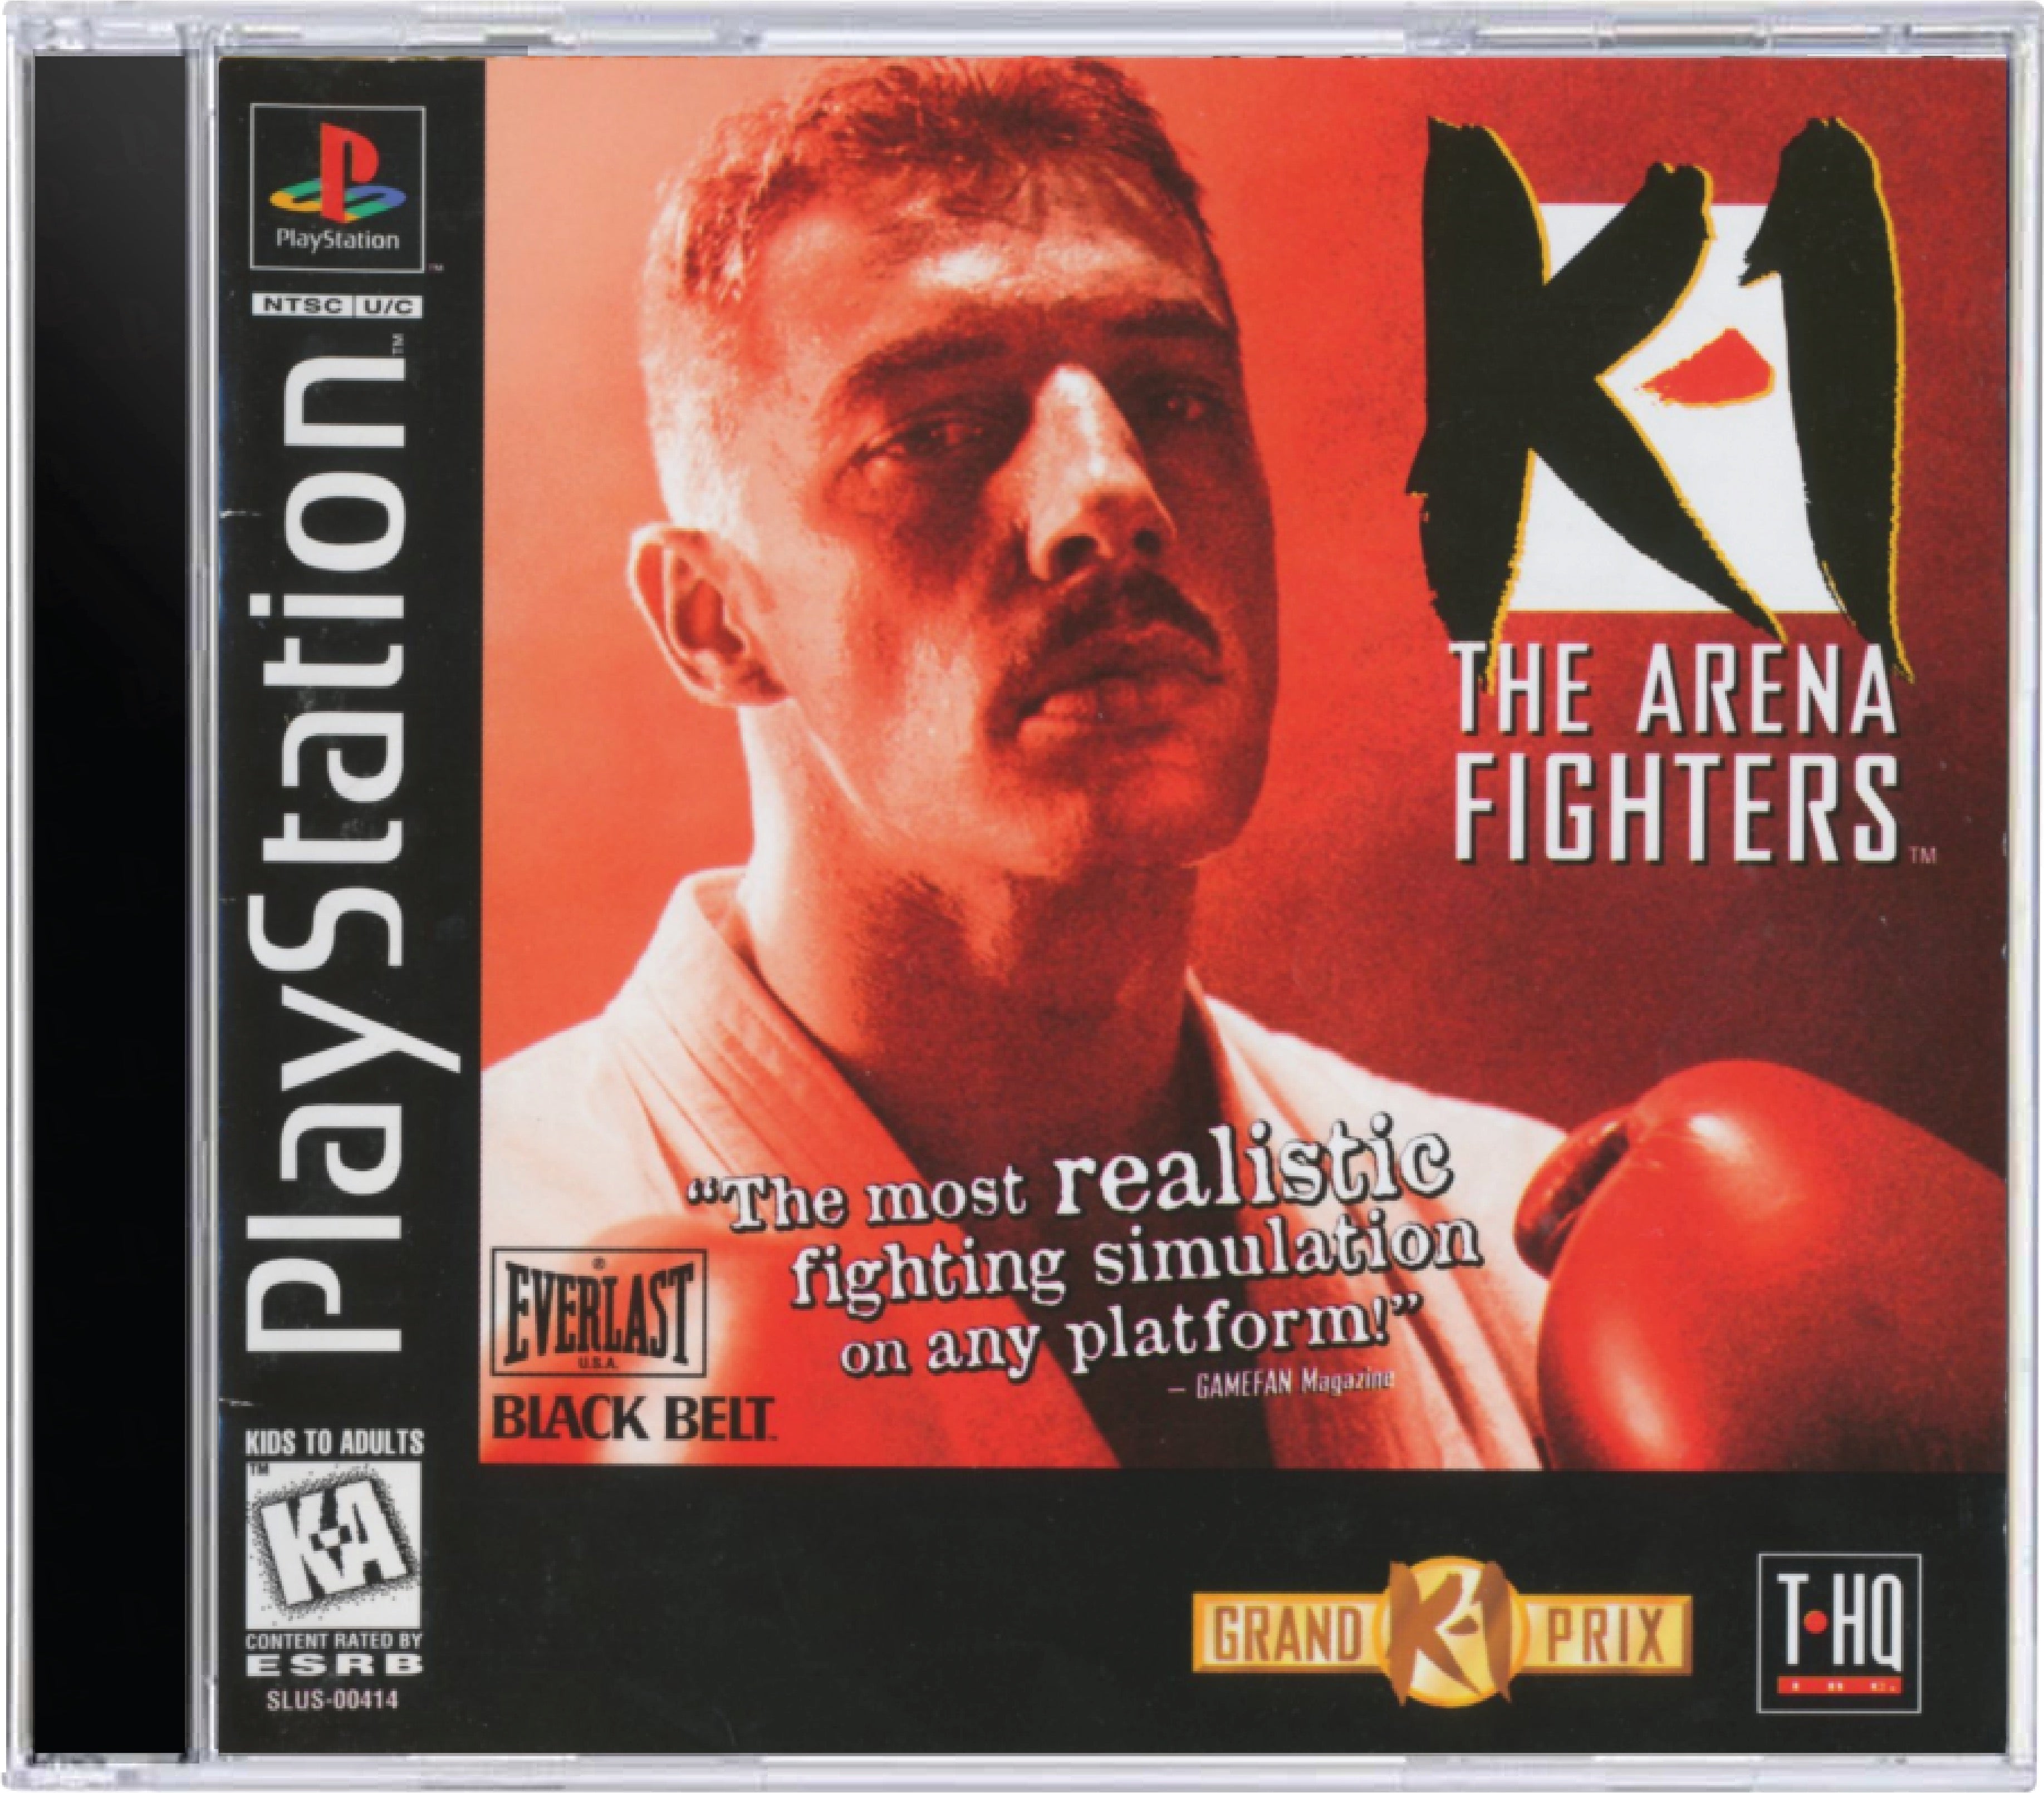 K-1 the Arena Fighters Cover Art and Product Photo